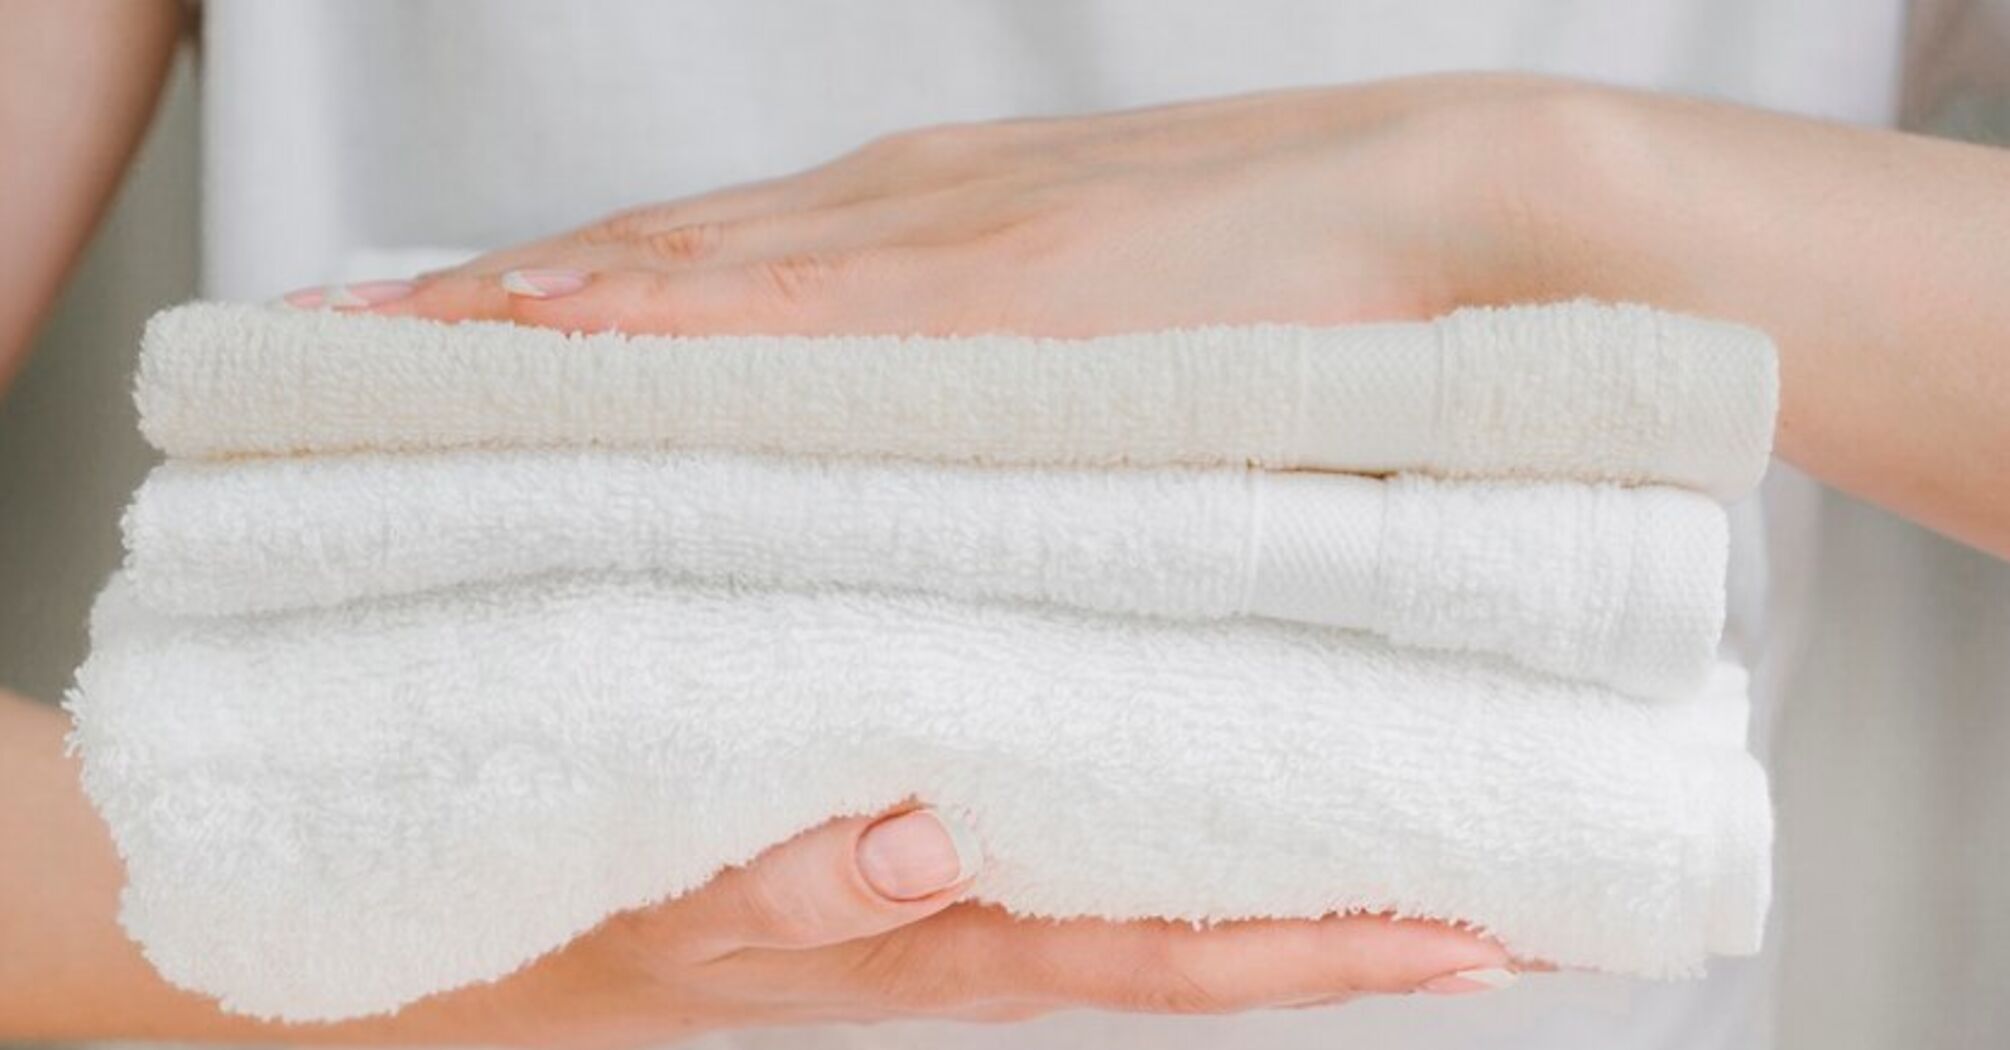 How to restore the softness of towels: 4 effective ways